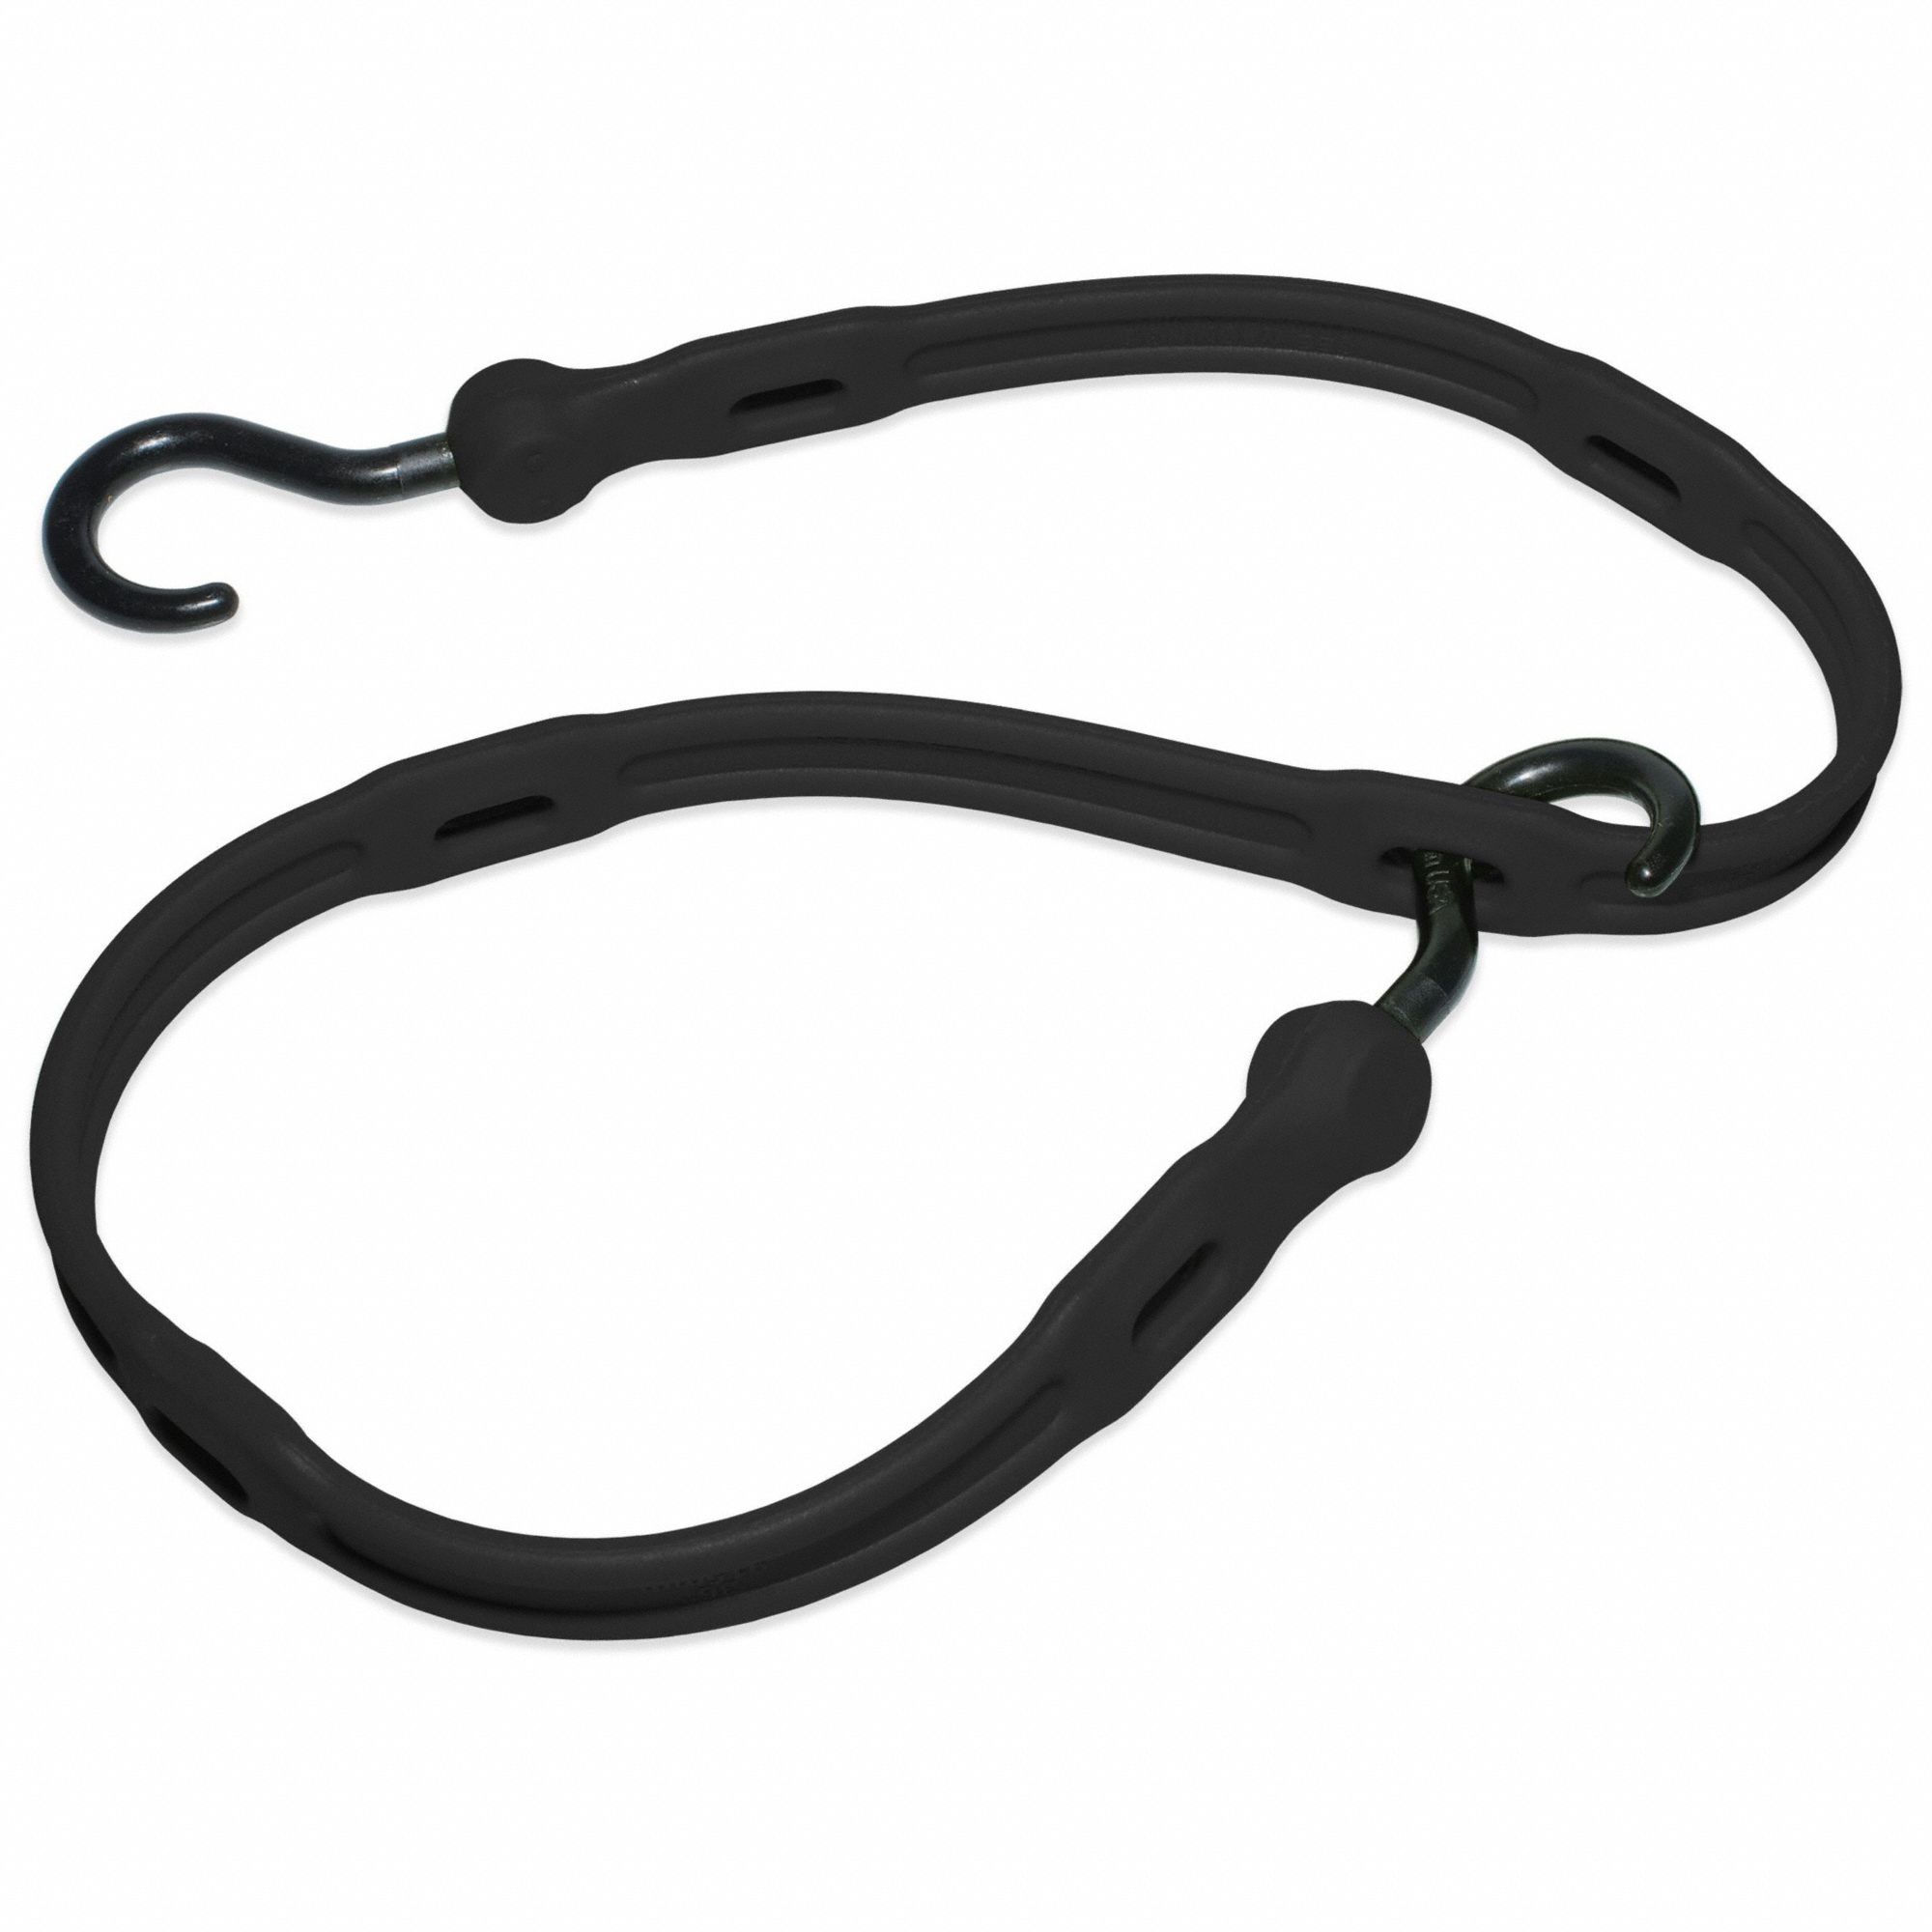 THE PERFECT BUNGEE BUNGEE STRAP,ADJUSTABLE,36 IN,BLACK - Bungee